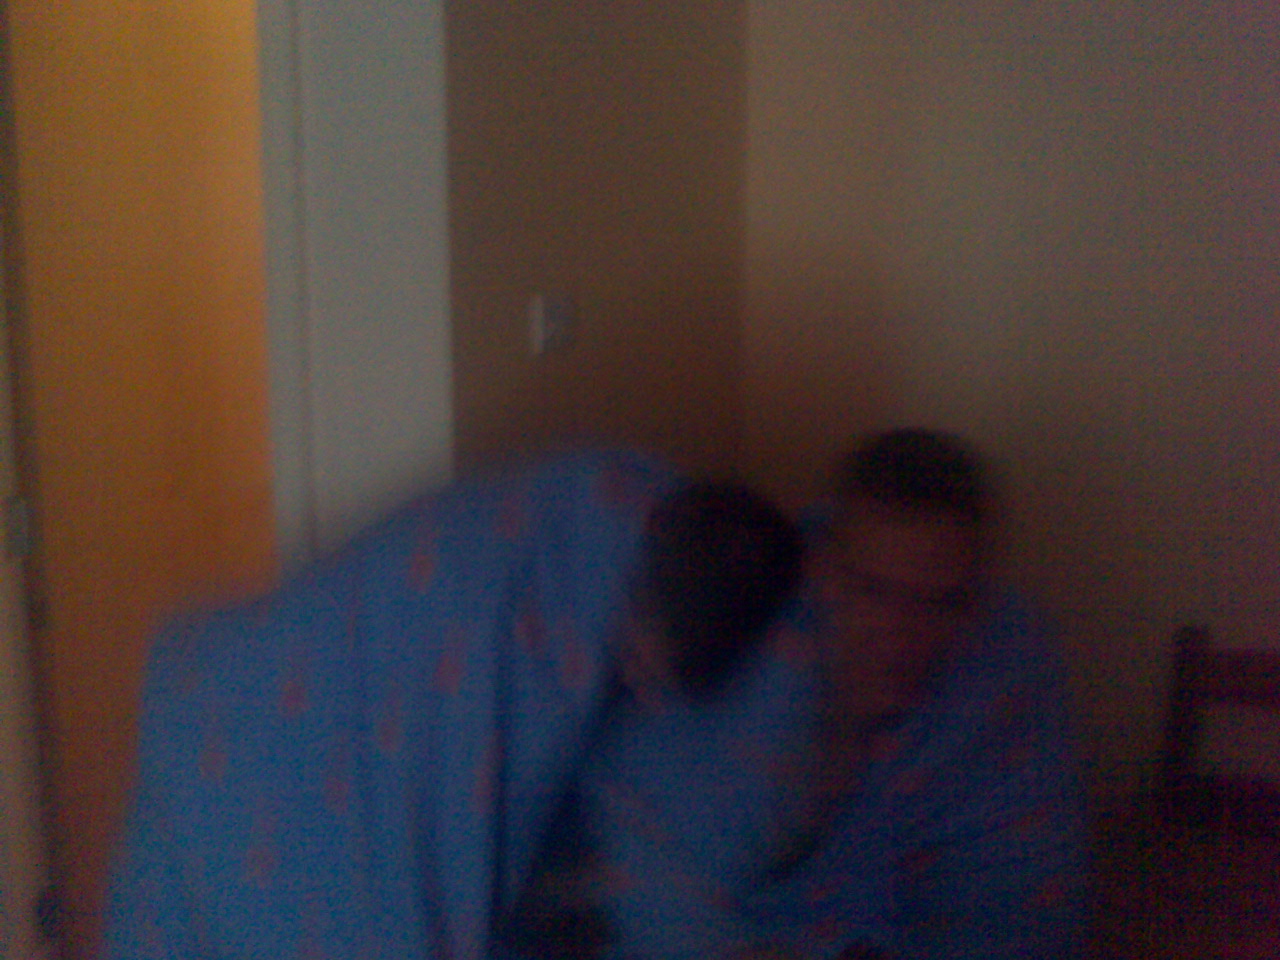 Alex and Crazydave snuggle up under their quilts